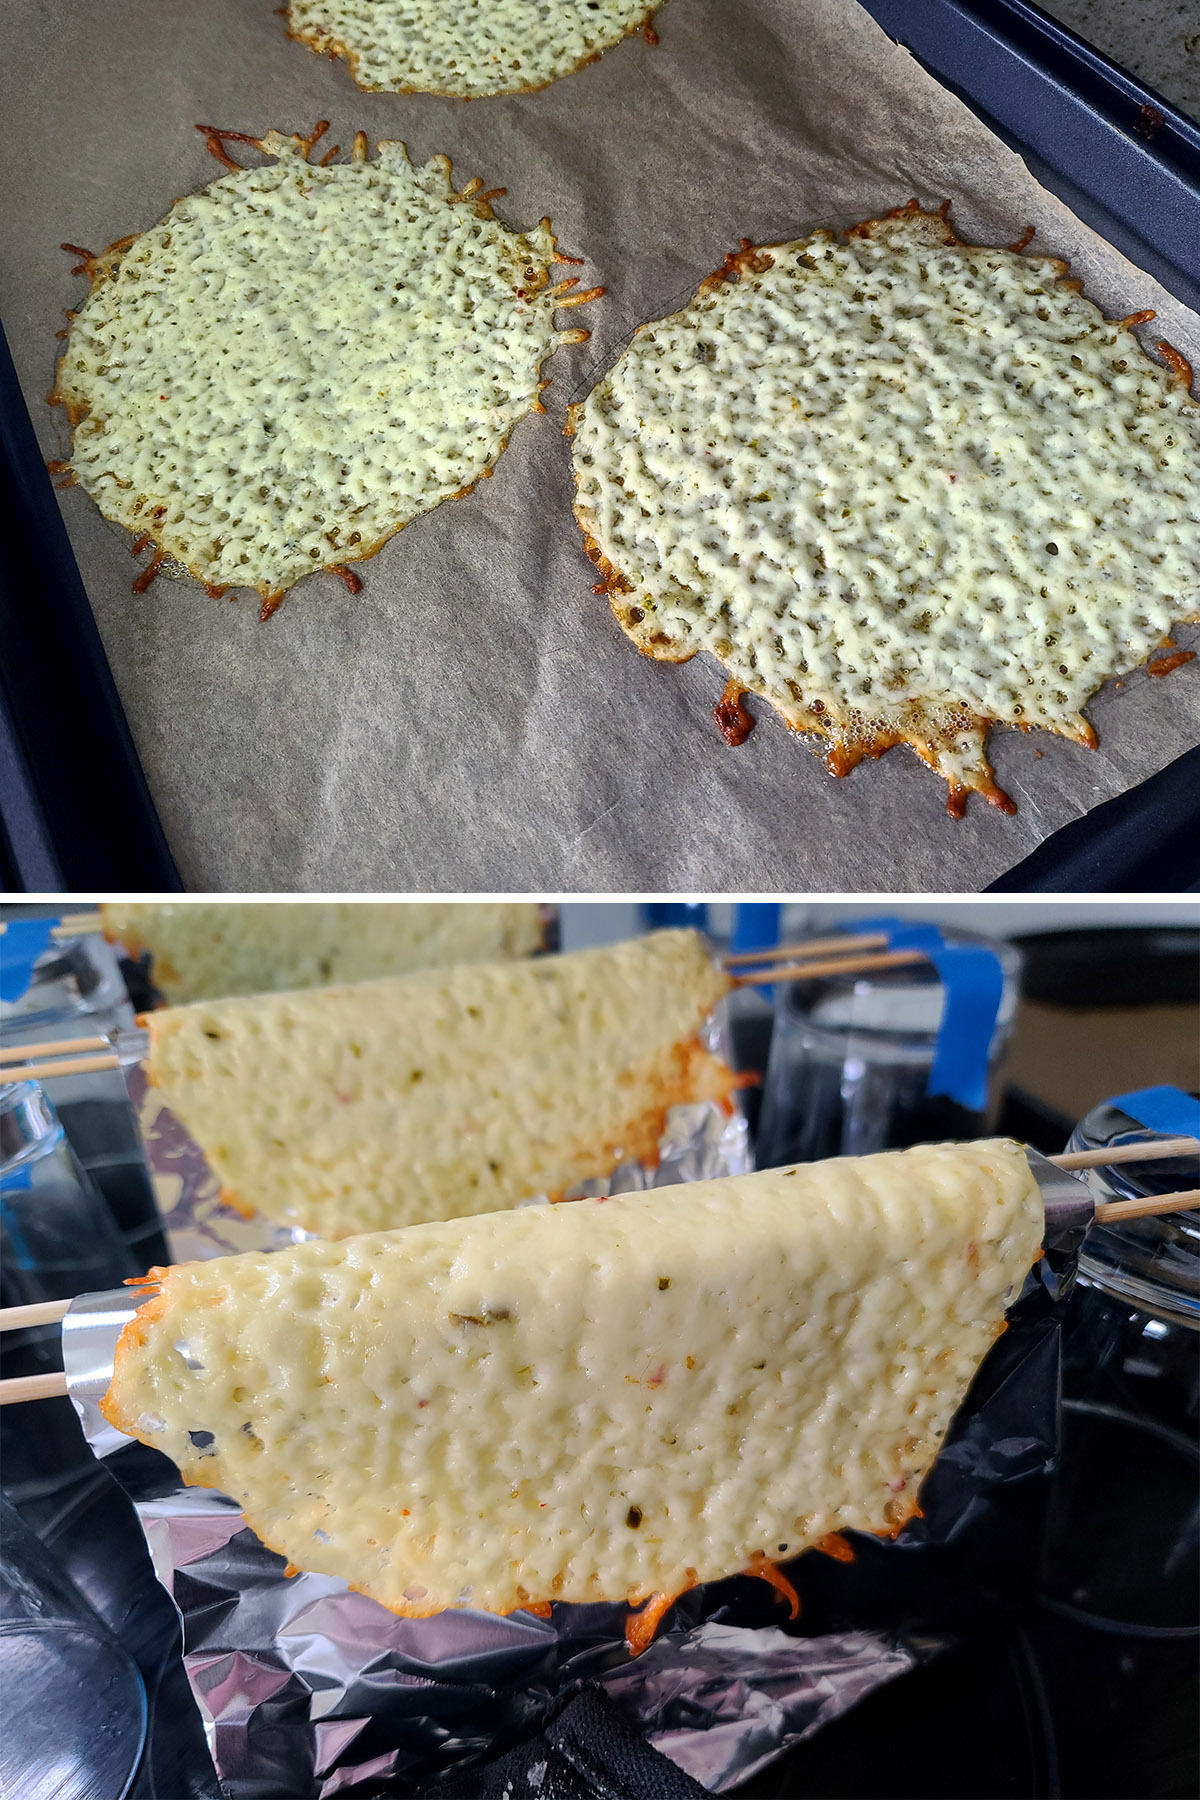 A 2 part image showing taco shells being made from jalapeno jack cheese.